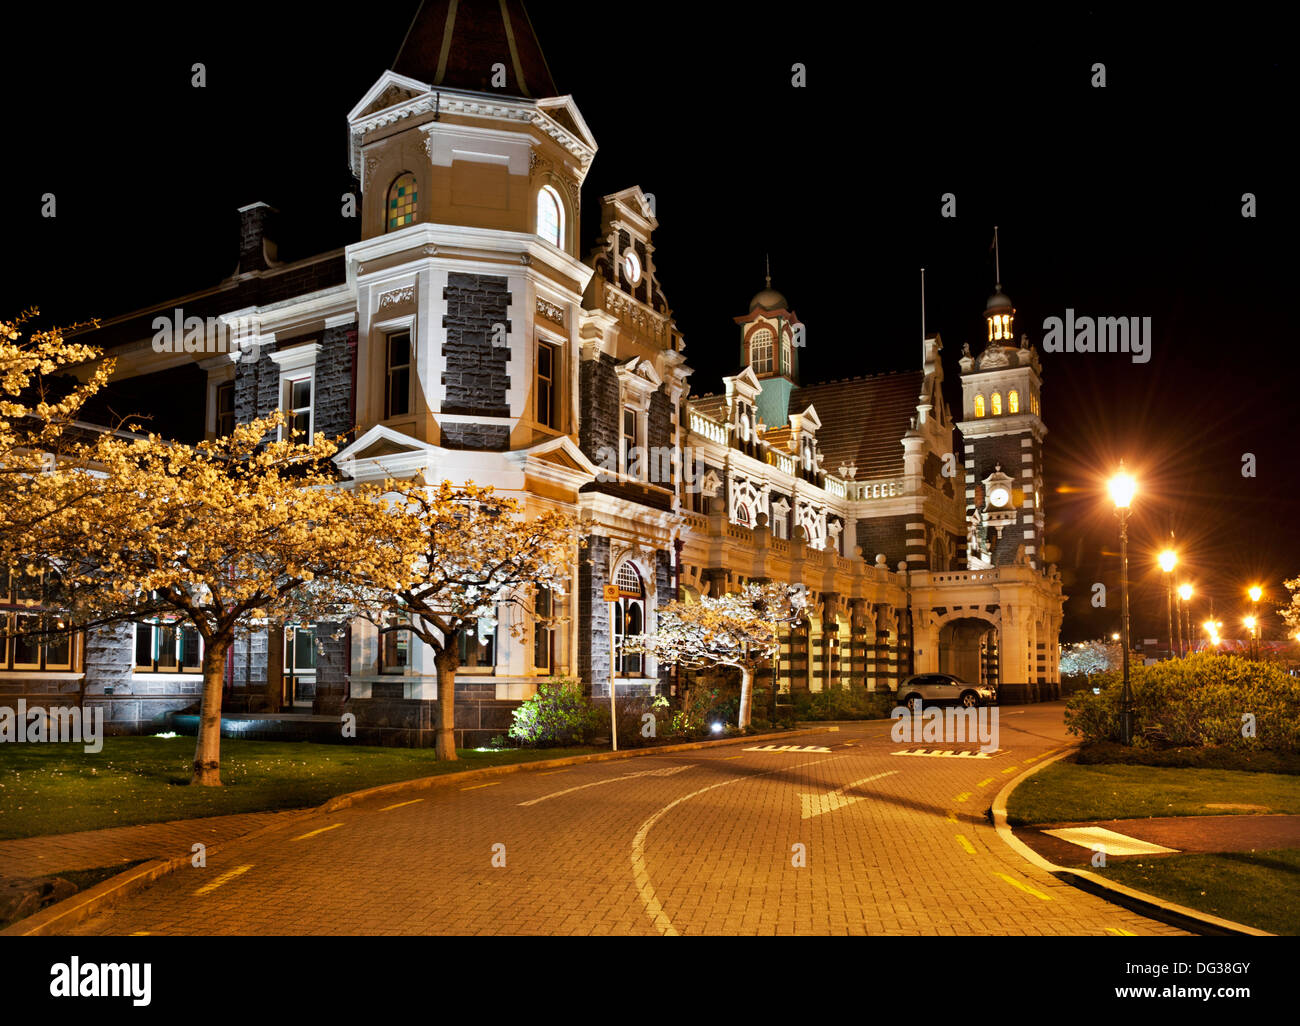 Dunedin, Otago, South Island, New Zealand. A night view of the famous railway station designed by Sir George Troup. Stock Photo